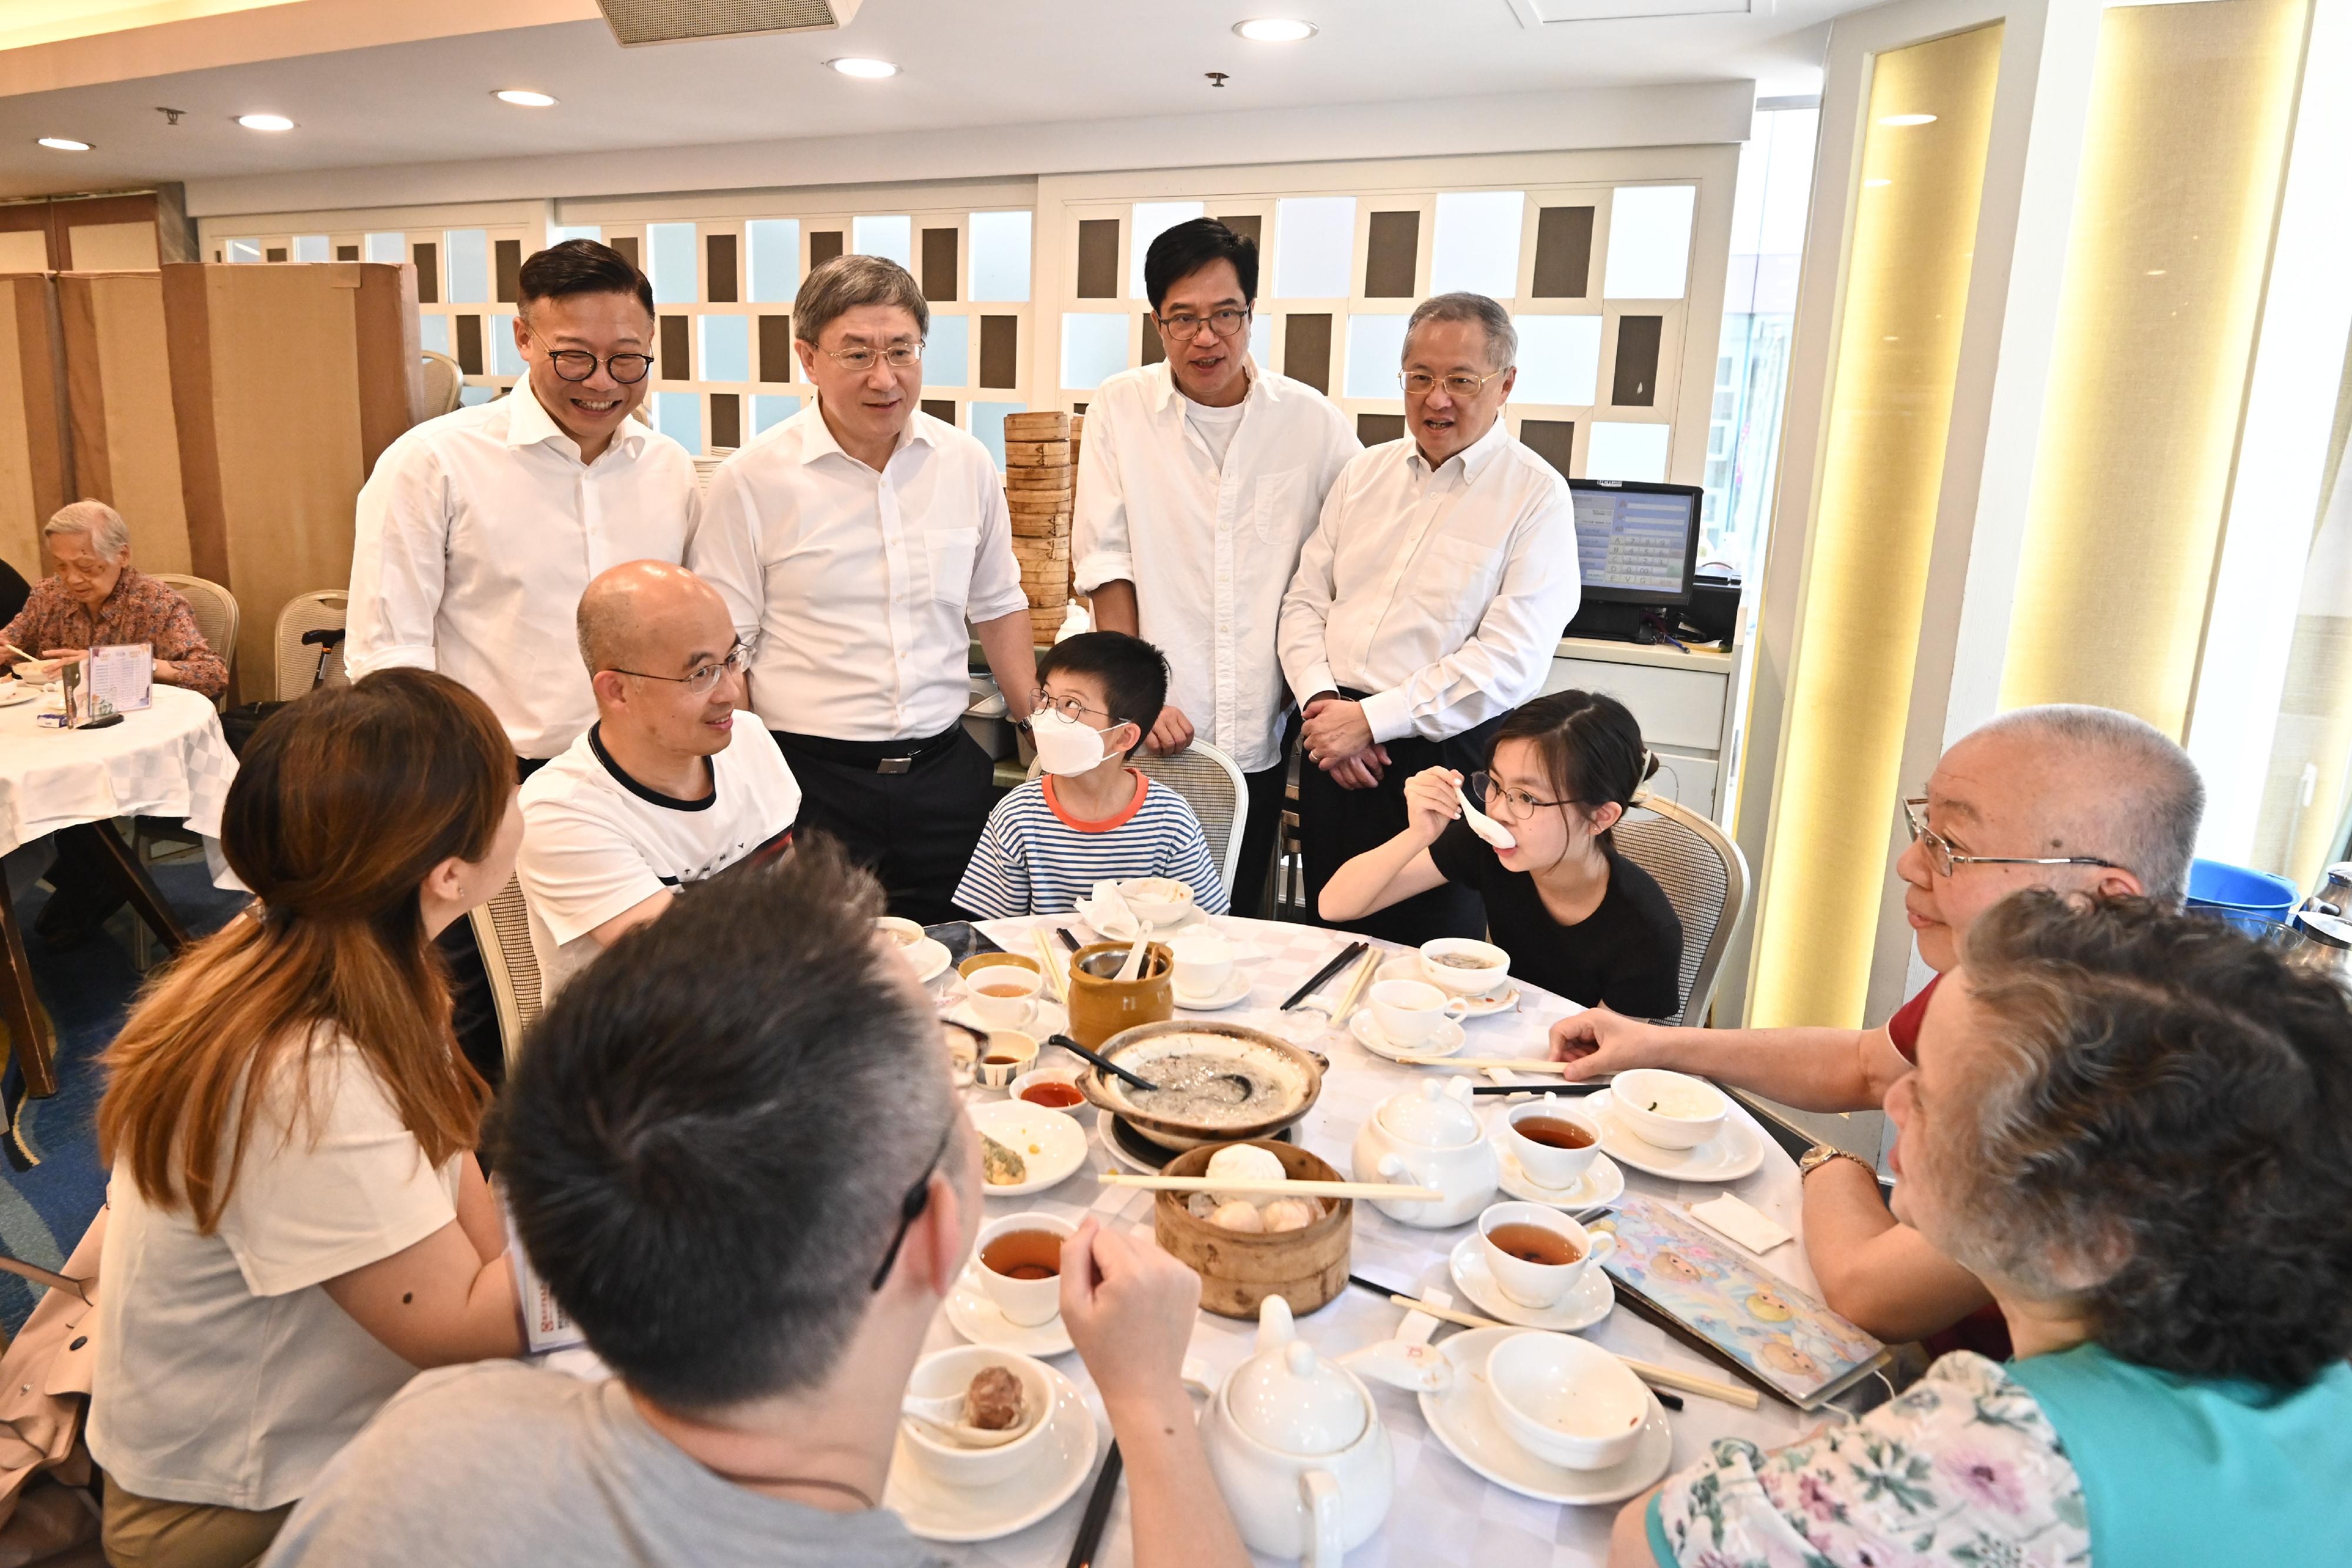 The Deputy Chief Secretary for Administration, Mr Cheuk Wing-hing (back row, left); the Deputy Financial Secretary, Mr Michael Wong (back row, centre); and the Deputy Secretary for Justice, Mr Cheung Kwok-kwan (back row, right), chat with members of the public at a North Point restaurant today (July 1). Looking on is the Legislative Council Member (Catering), Mr Tommy Cheung (back row, first right).